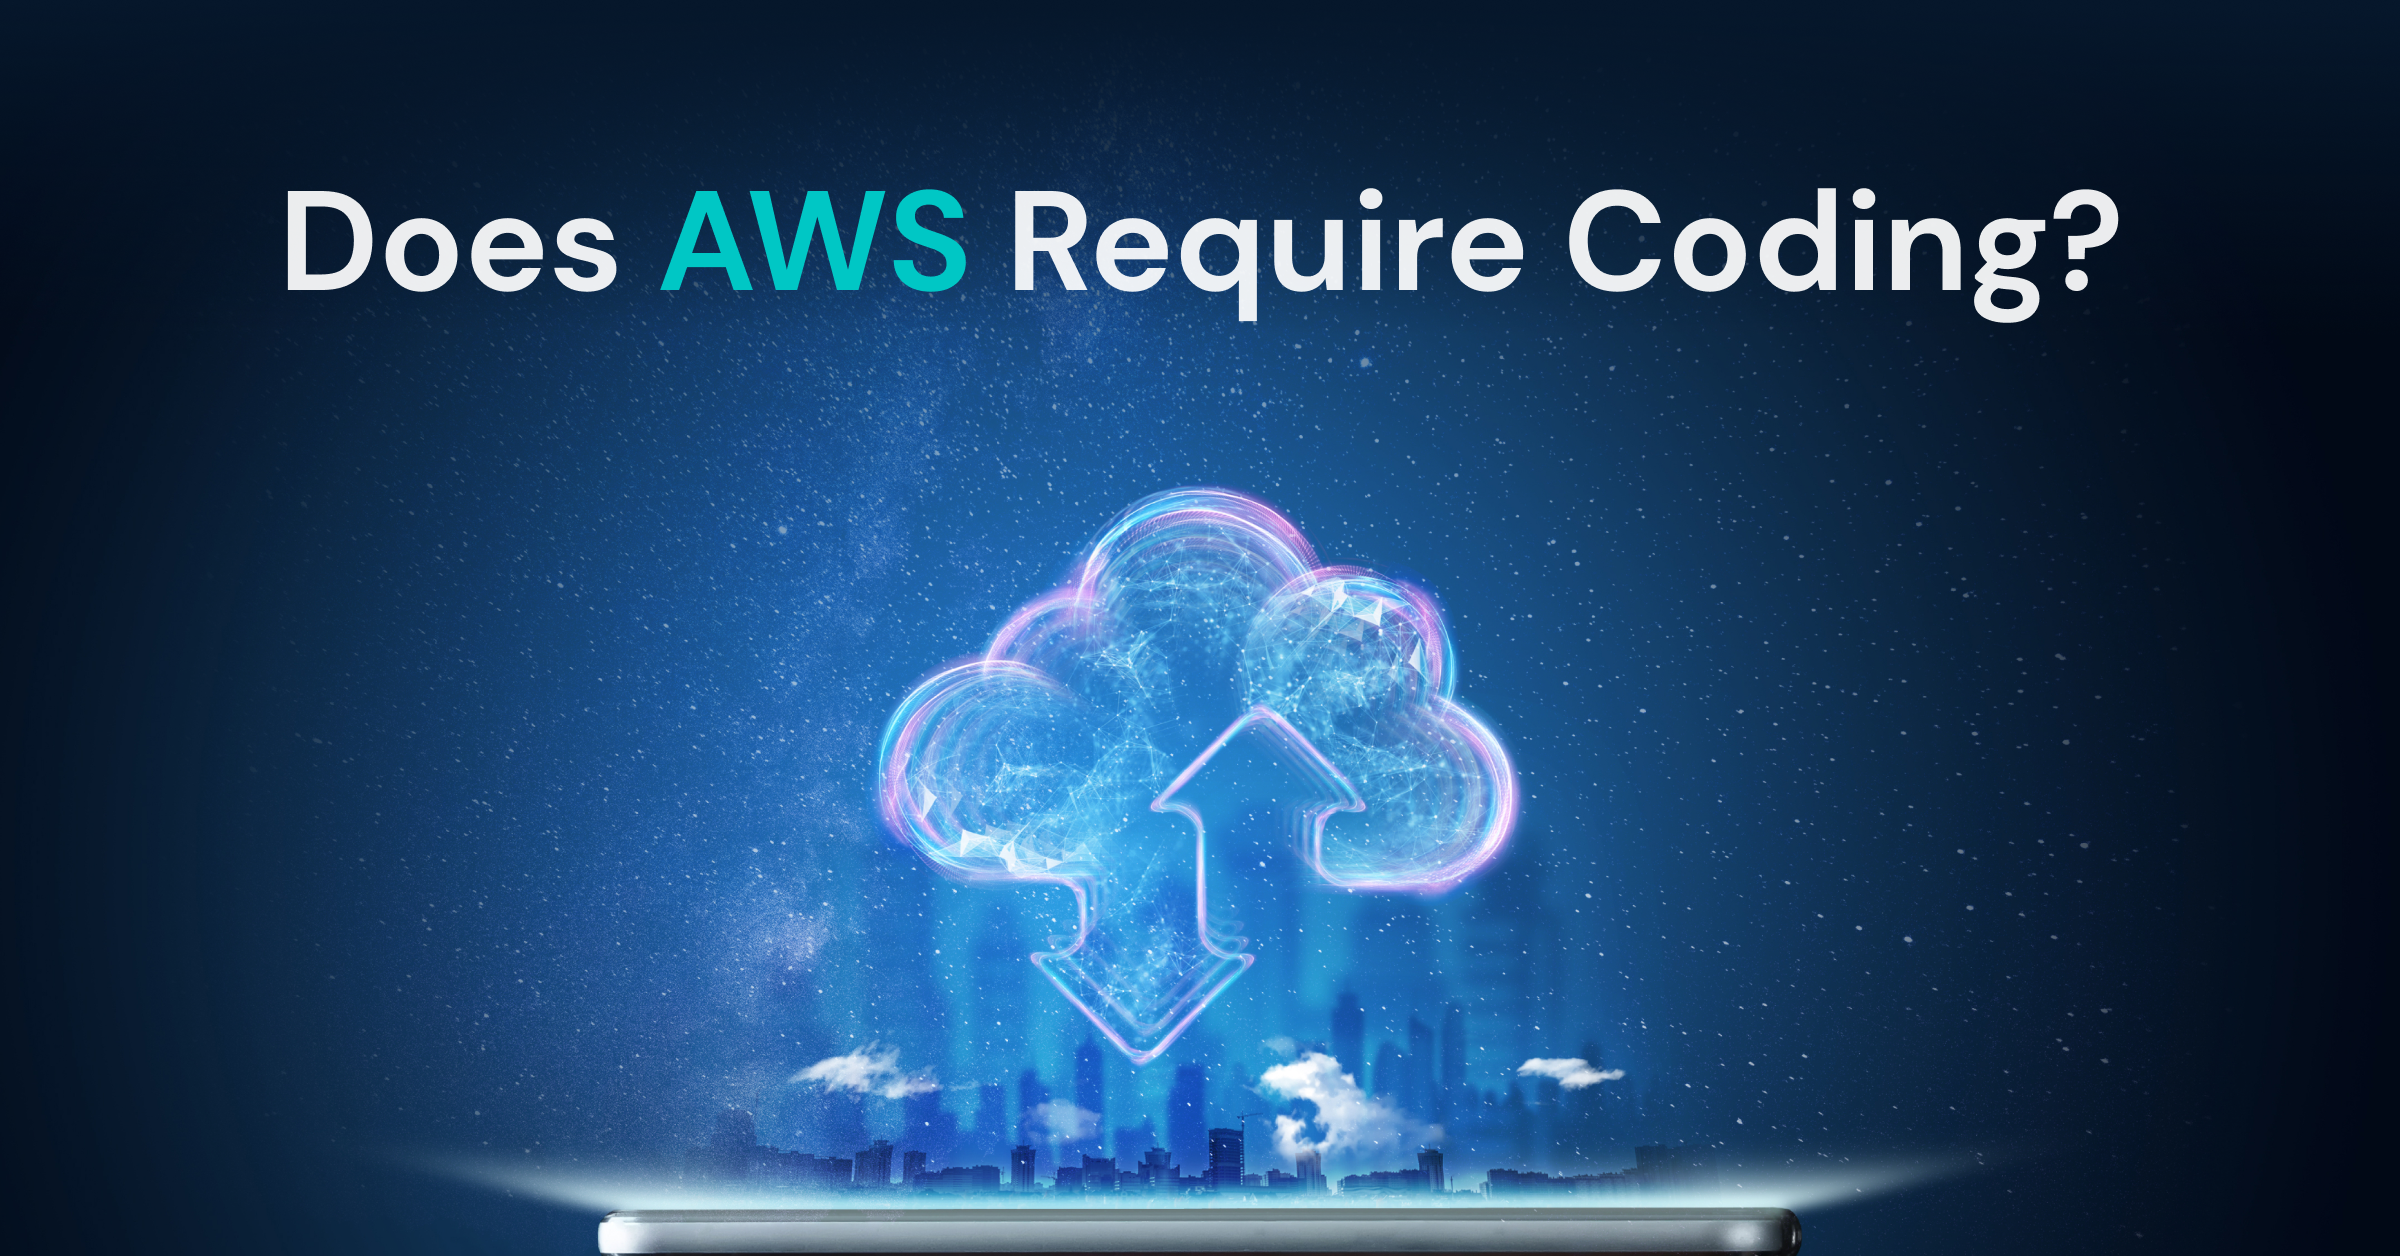 Does aws require coding